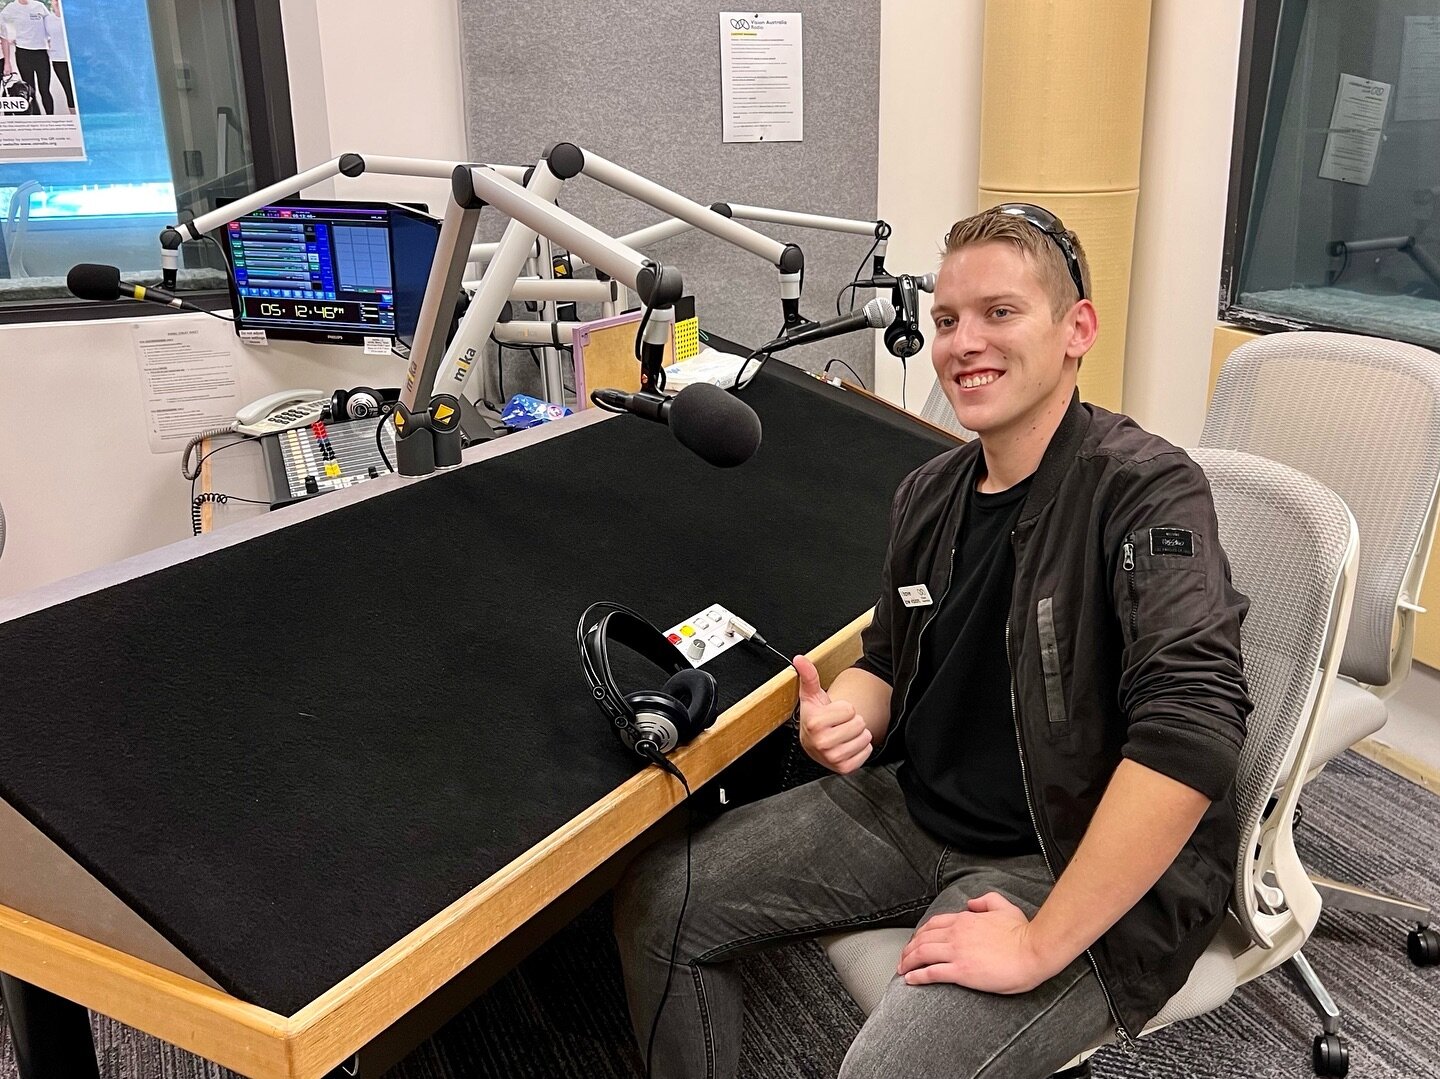 Today I had my first in studio Radio training session at @visionaustralia with my mentor from @cmto.org.au where I&rsquo;m currently a part of the audio ability training program. 
Looking forward to getting behind the mic on the radio 😃🎙️

Image De